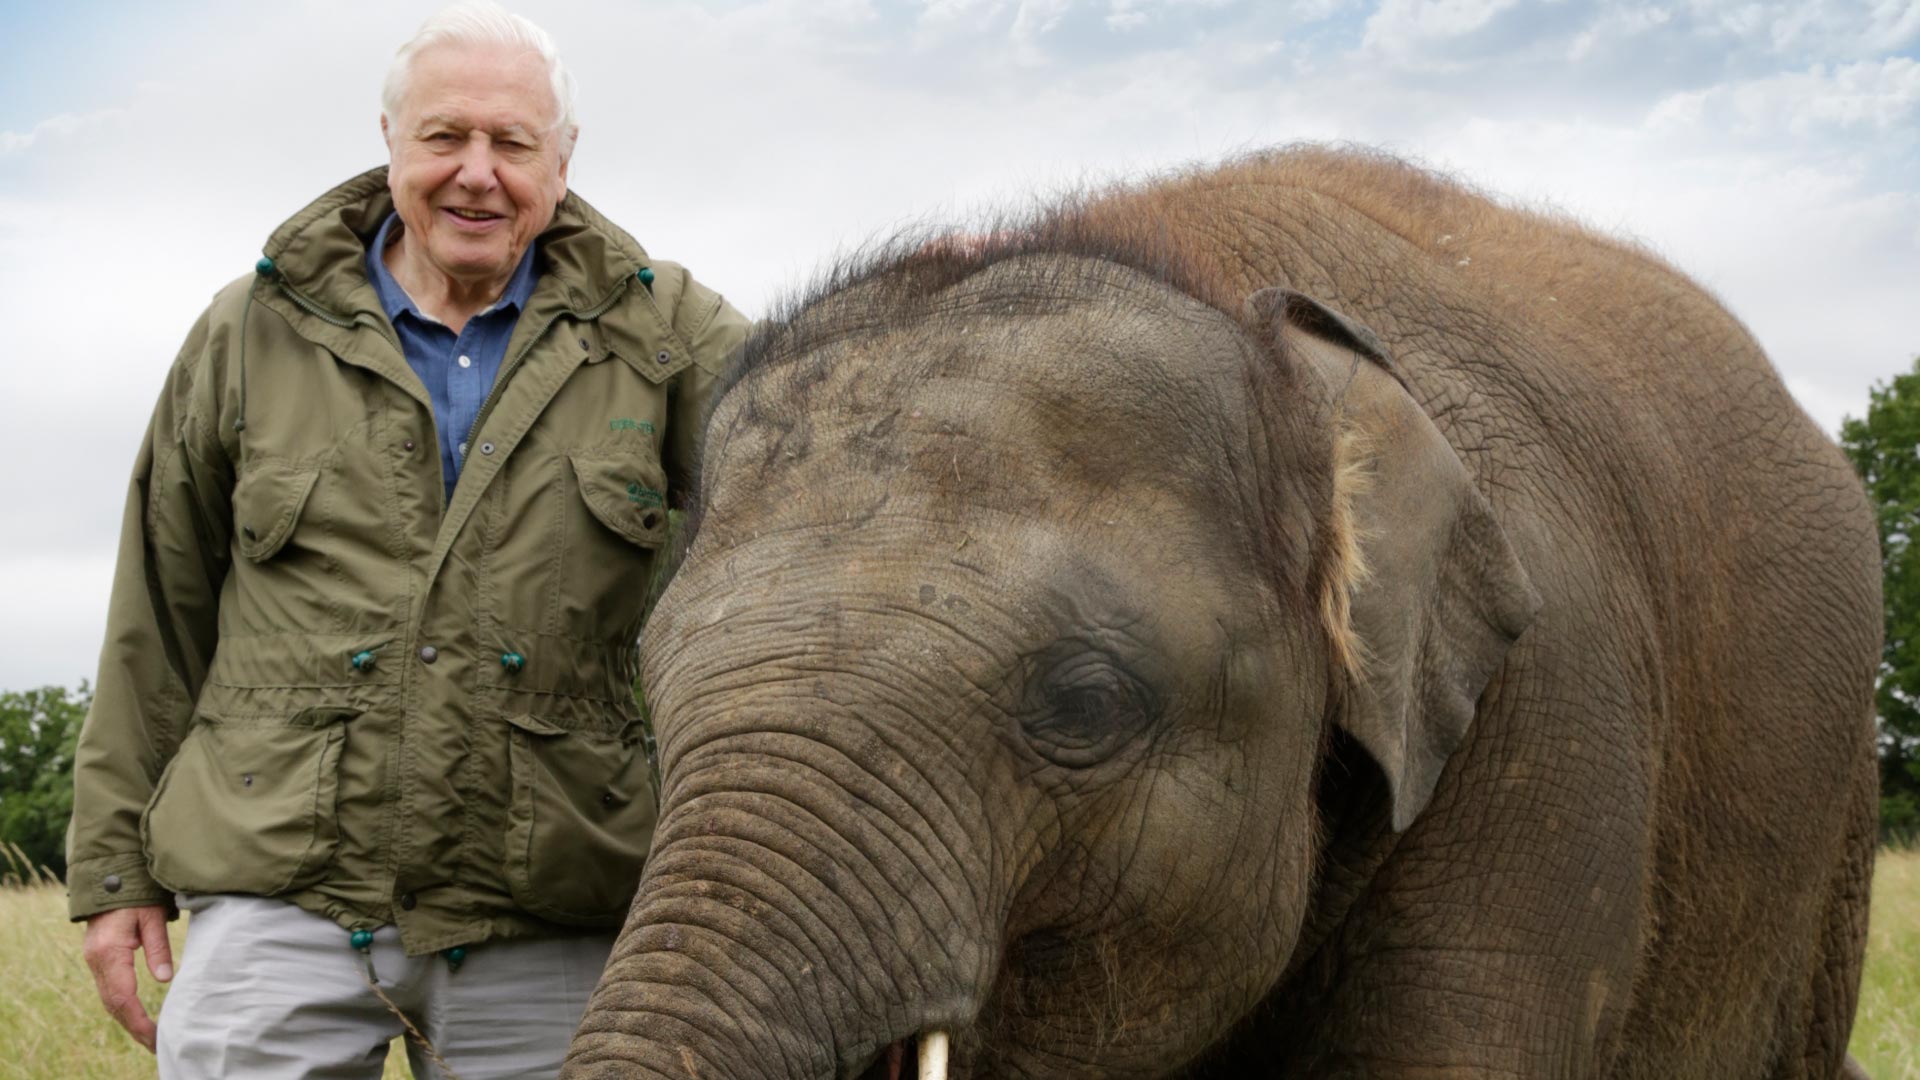 Watch Attenborough and the Giant Elephant Online | Stream Full Episodes